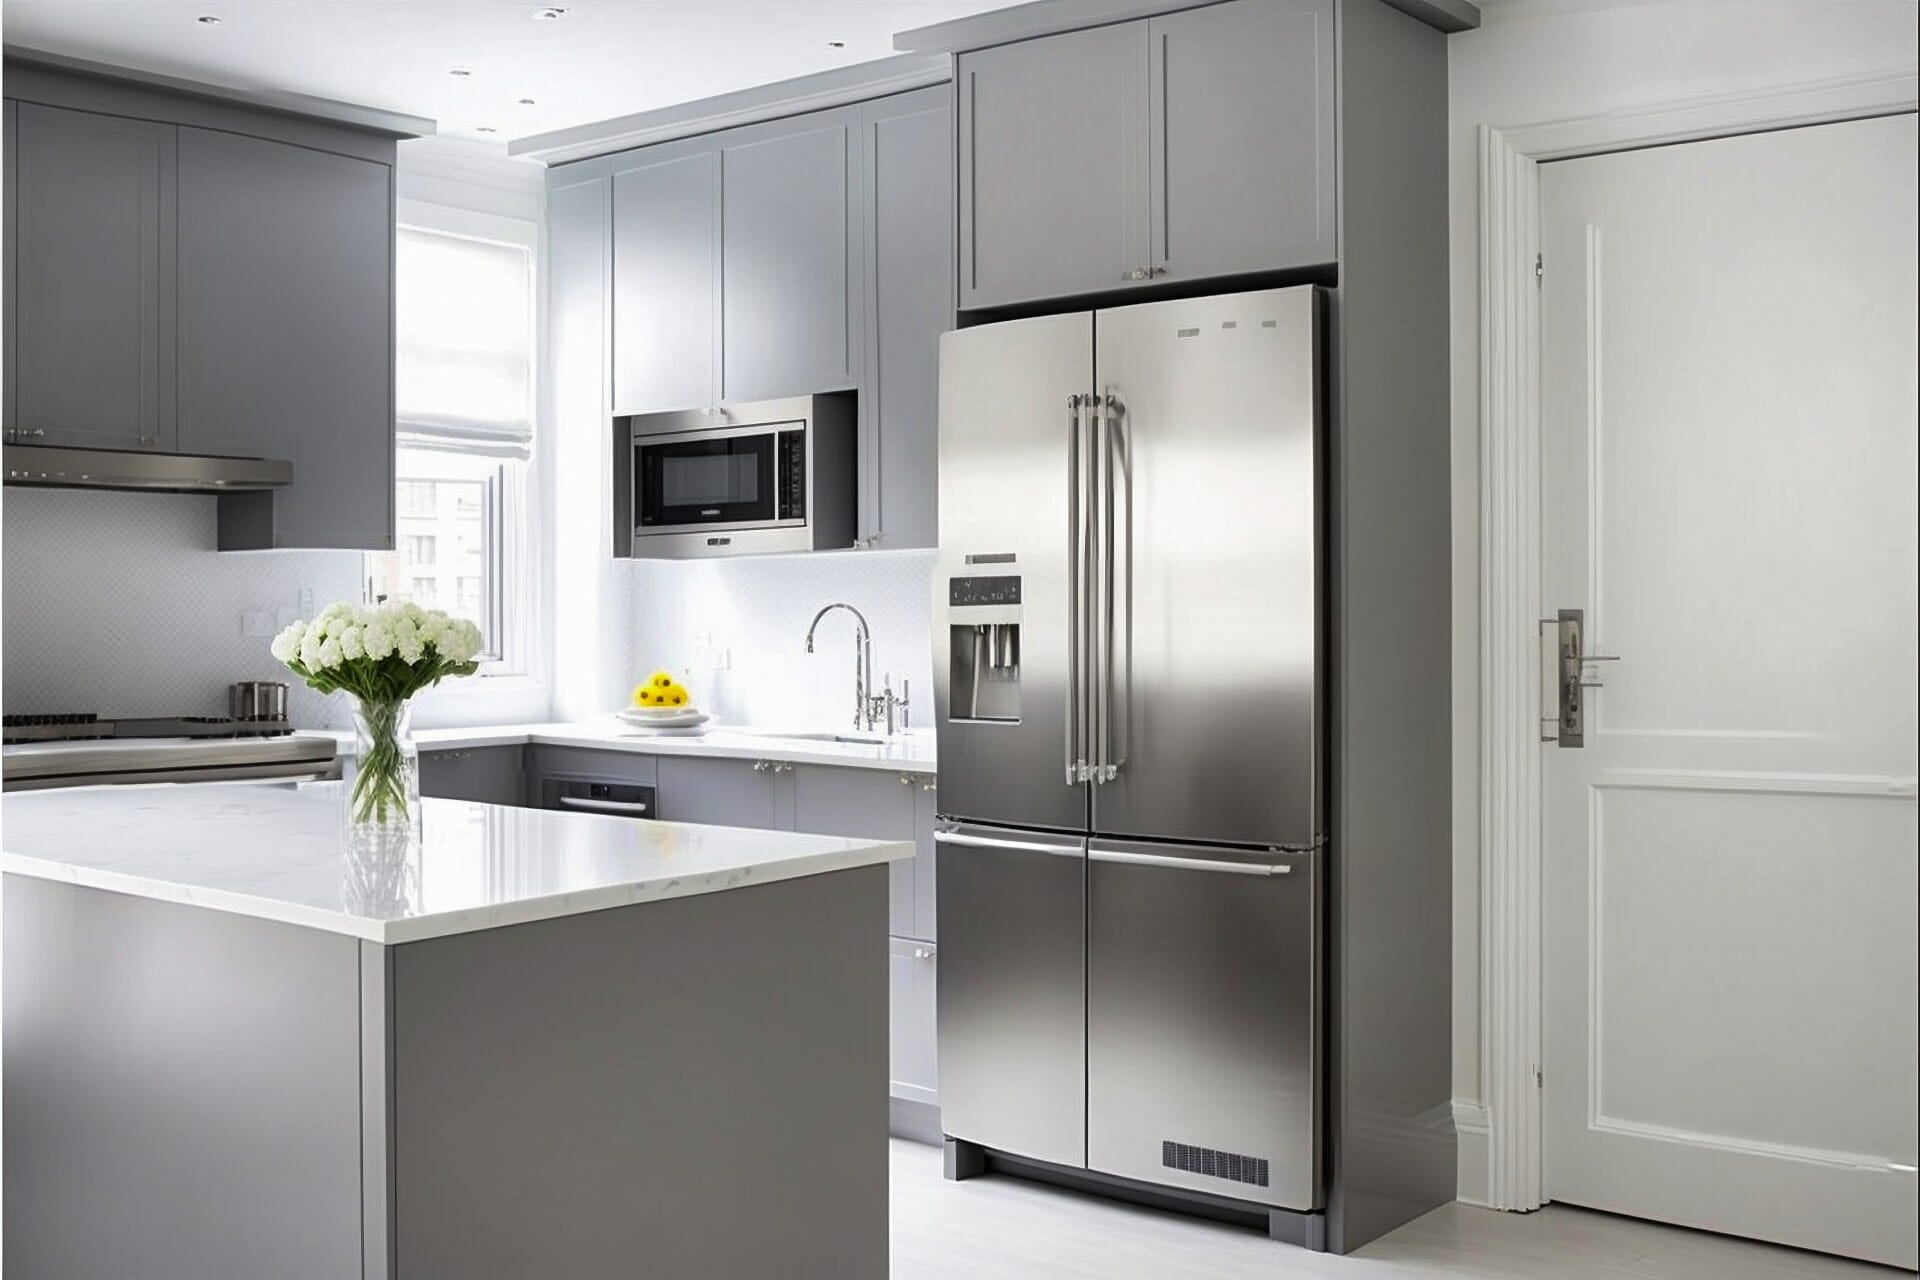 This Minimalist Kitchen Features Light Grey Cabinetry And Countertops, Creating A Subtle Yet Elegant Atmosphere. The Stainless Steel Appliances Add A Modern Touch, While The White Backsplash And Minimalistic Accents Complete The Look.